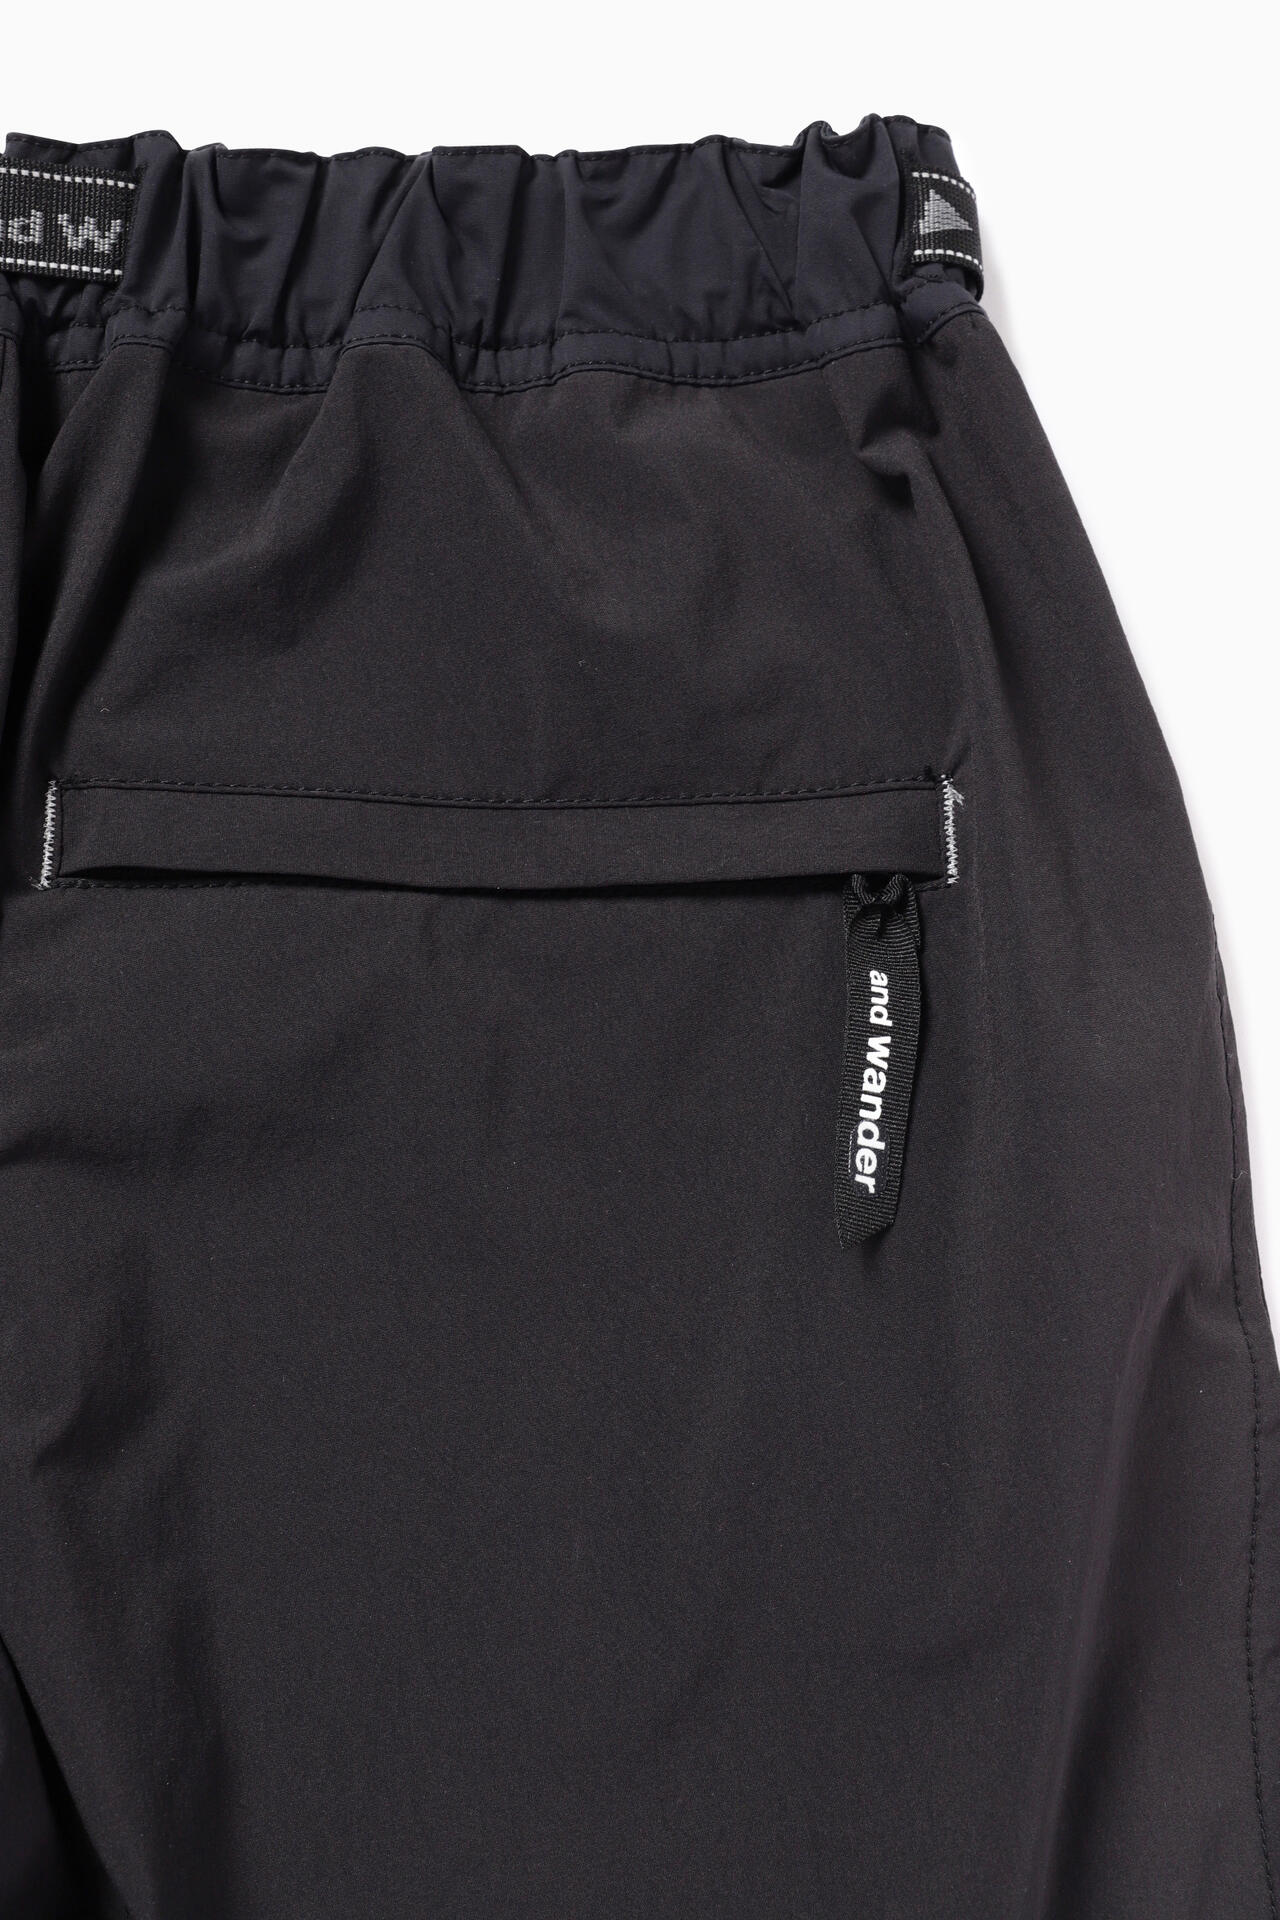 CORDURA stretch saruel pants | bottoms | and wander ONLINE STORE